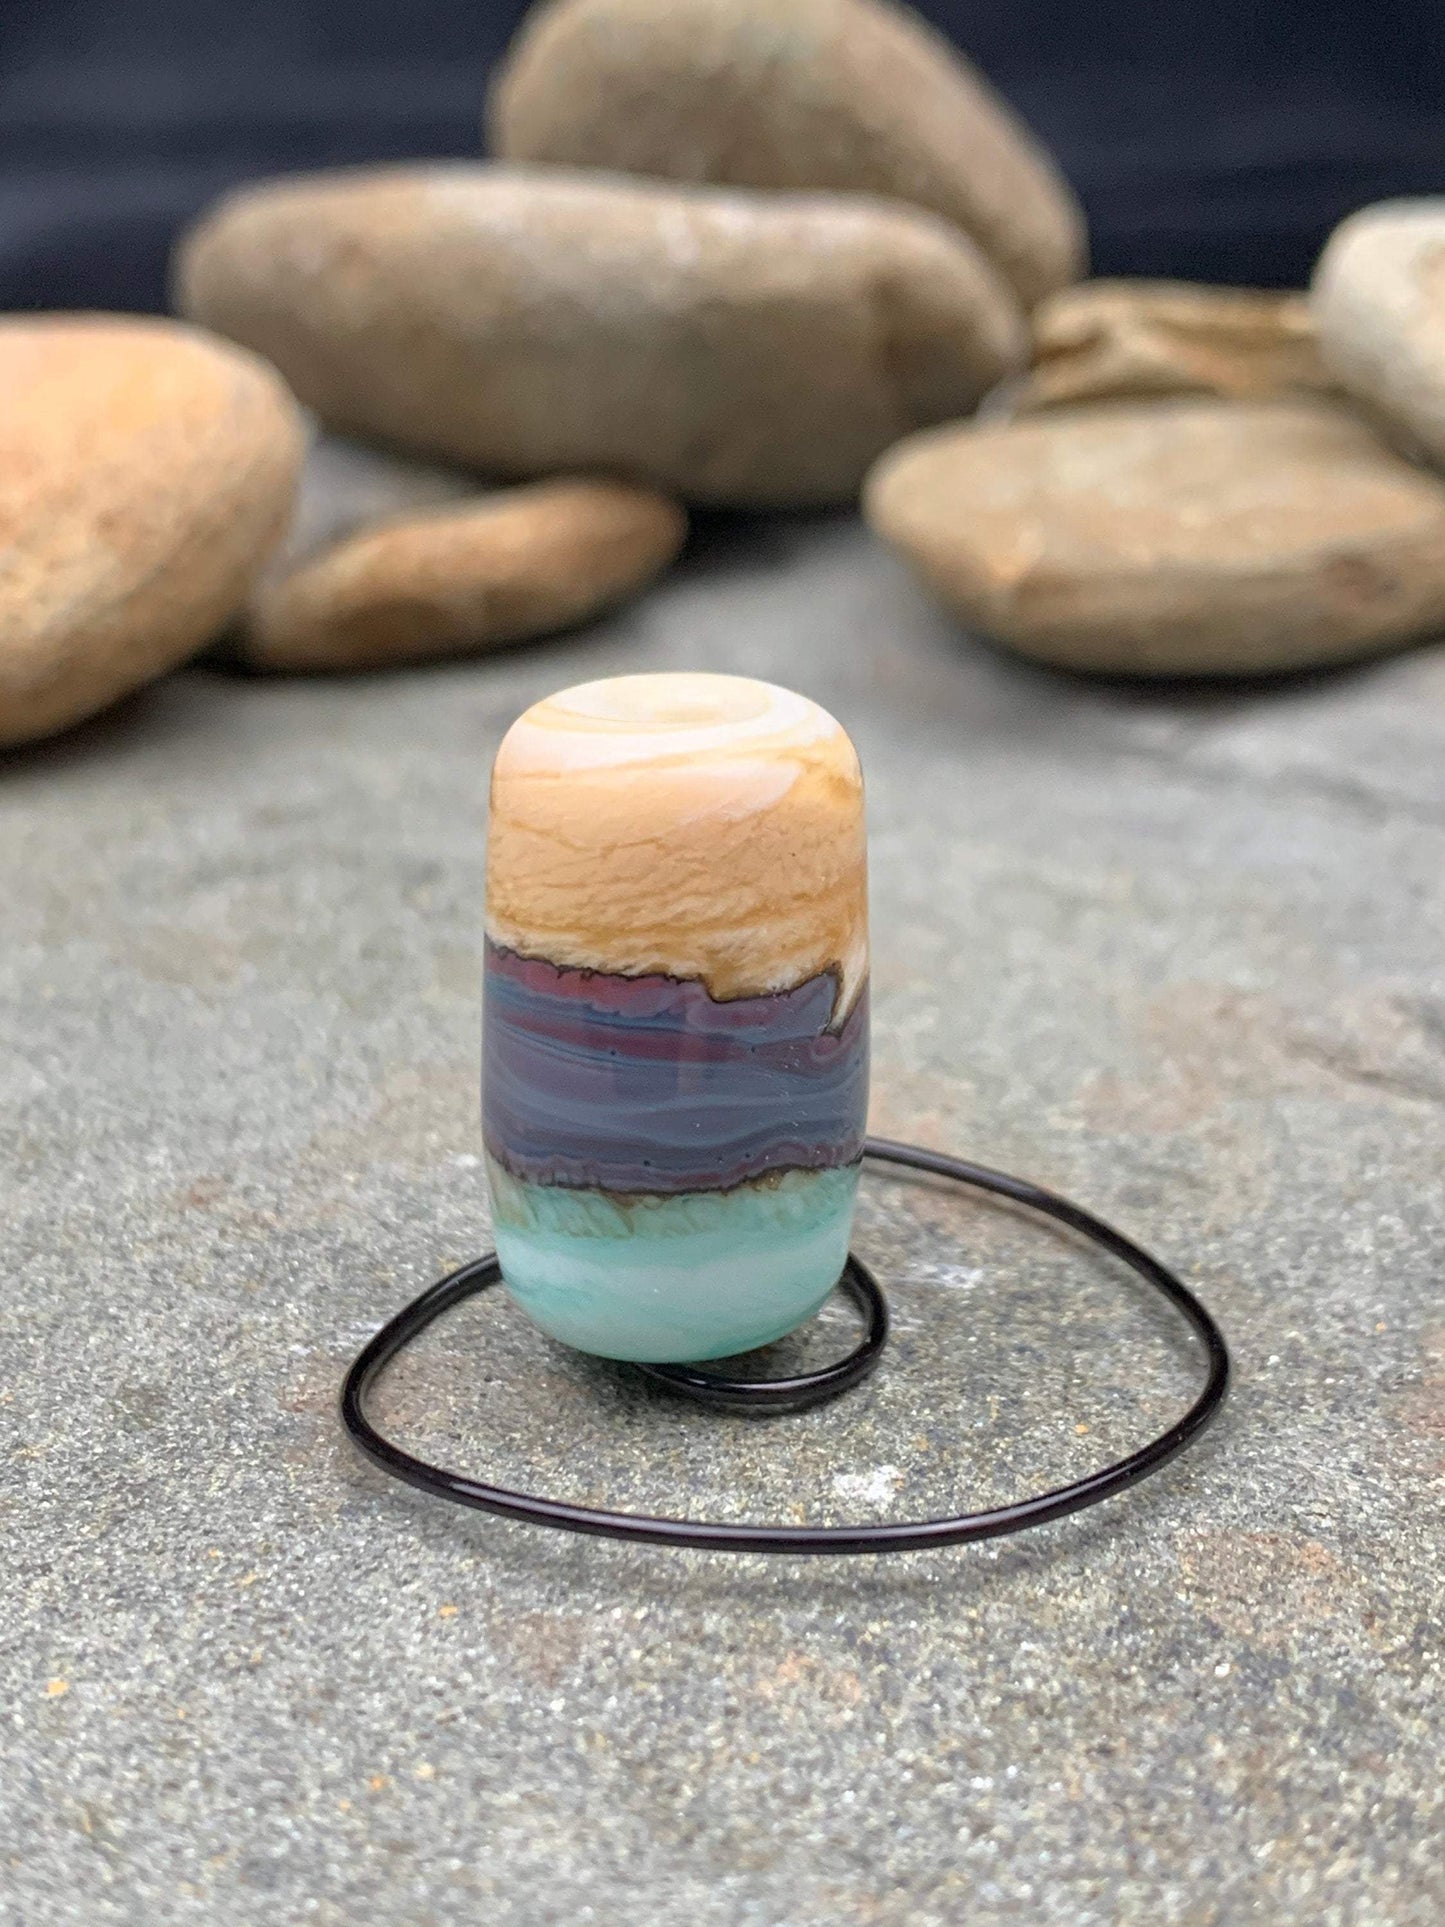 a handmade lampworked glass bead made of ivory, purple, and turquoise glass swirled into bands.